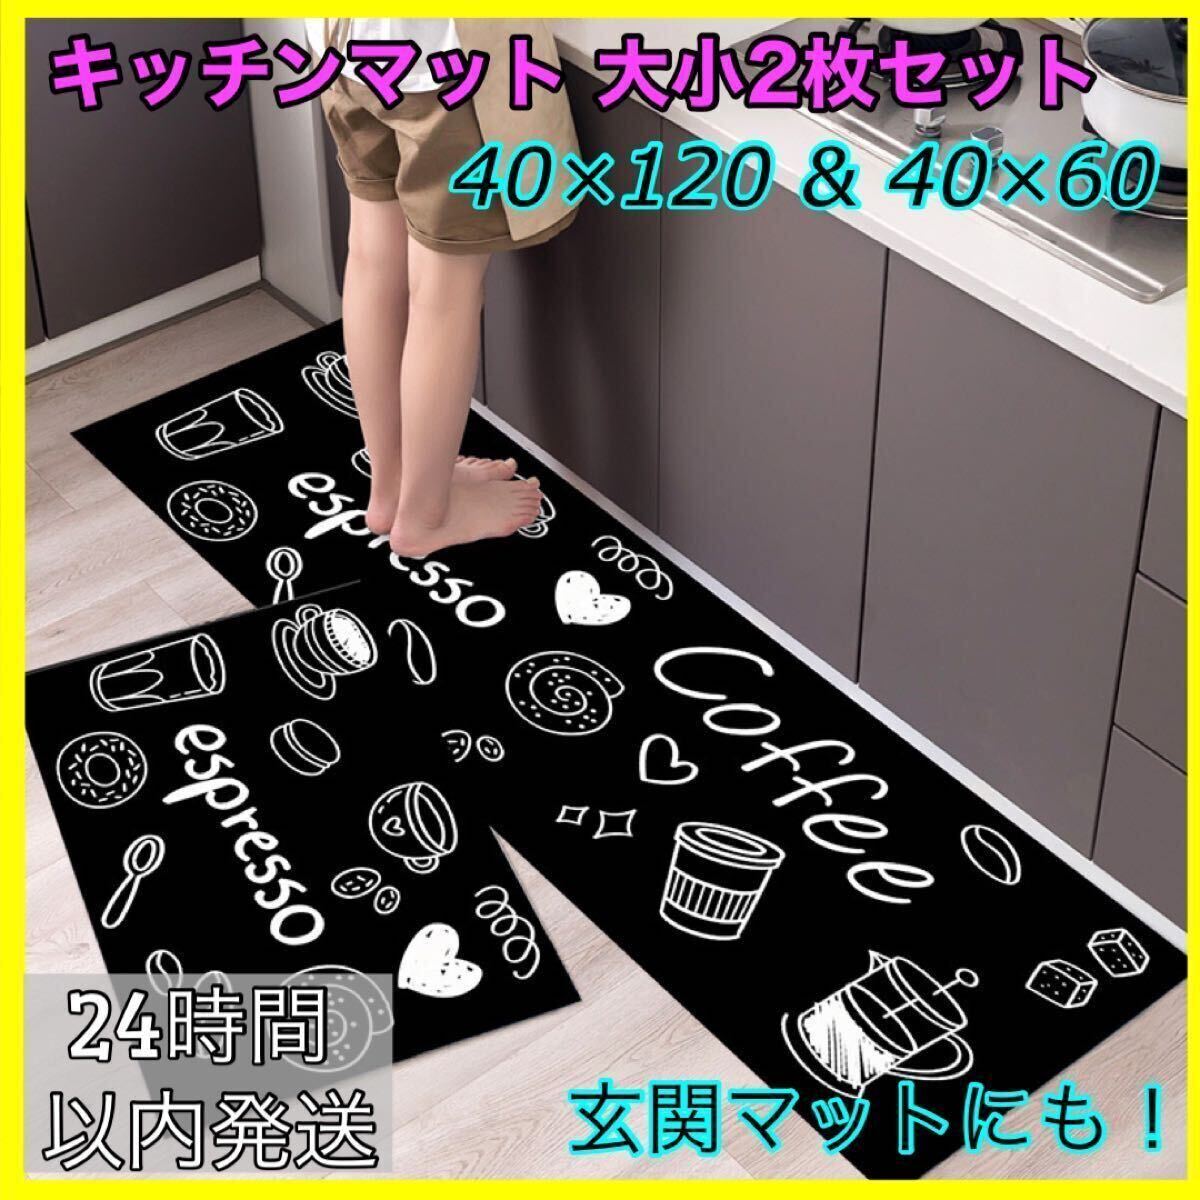  kitchen mat door mat large small set coffee pattern dressing up Cafe manner Northern Europe [ new goods unused ]